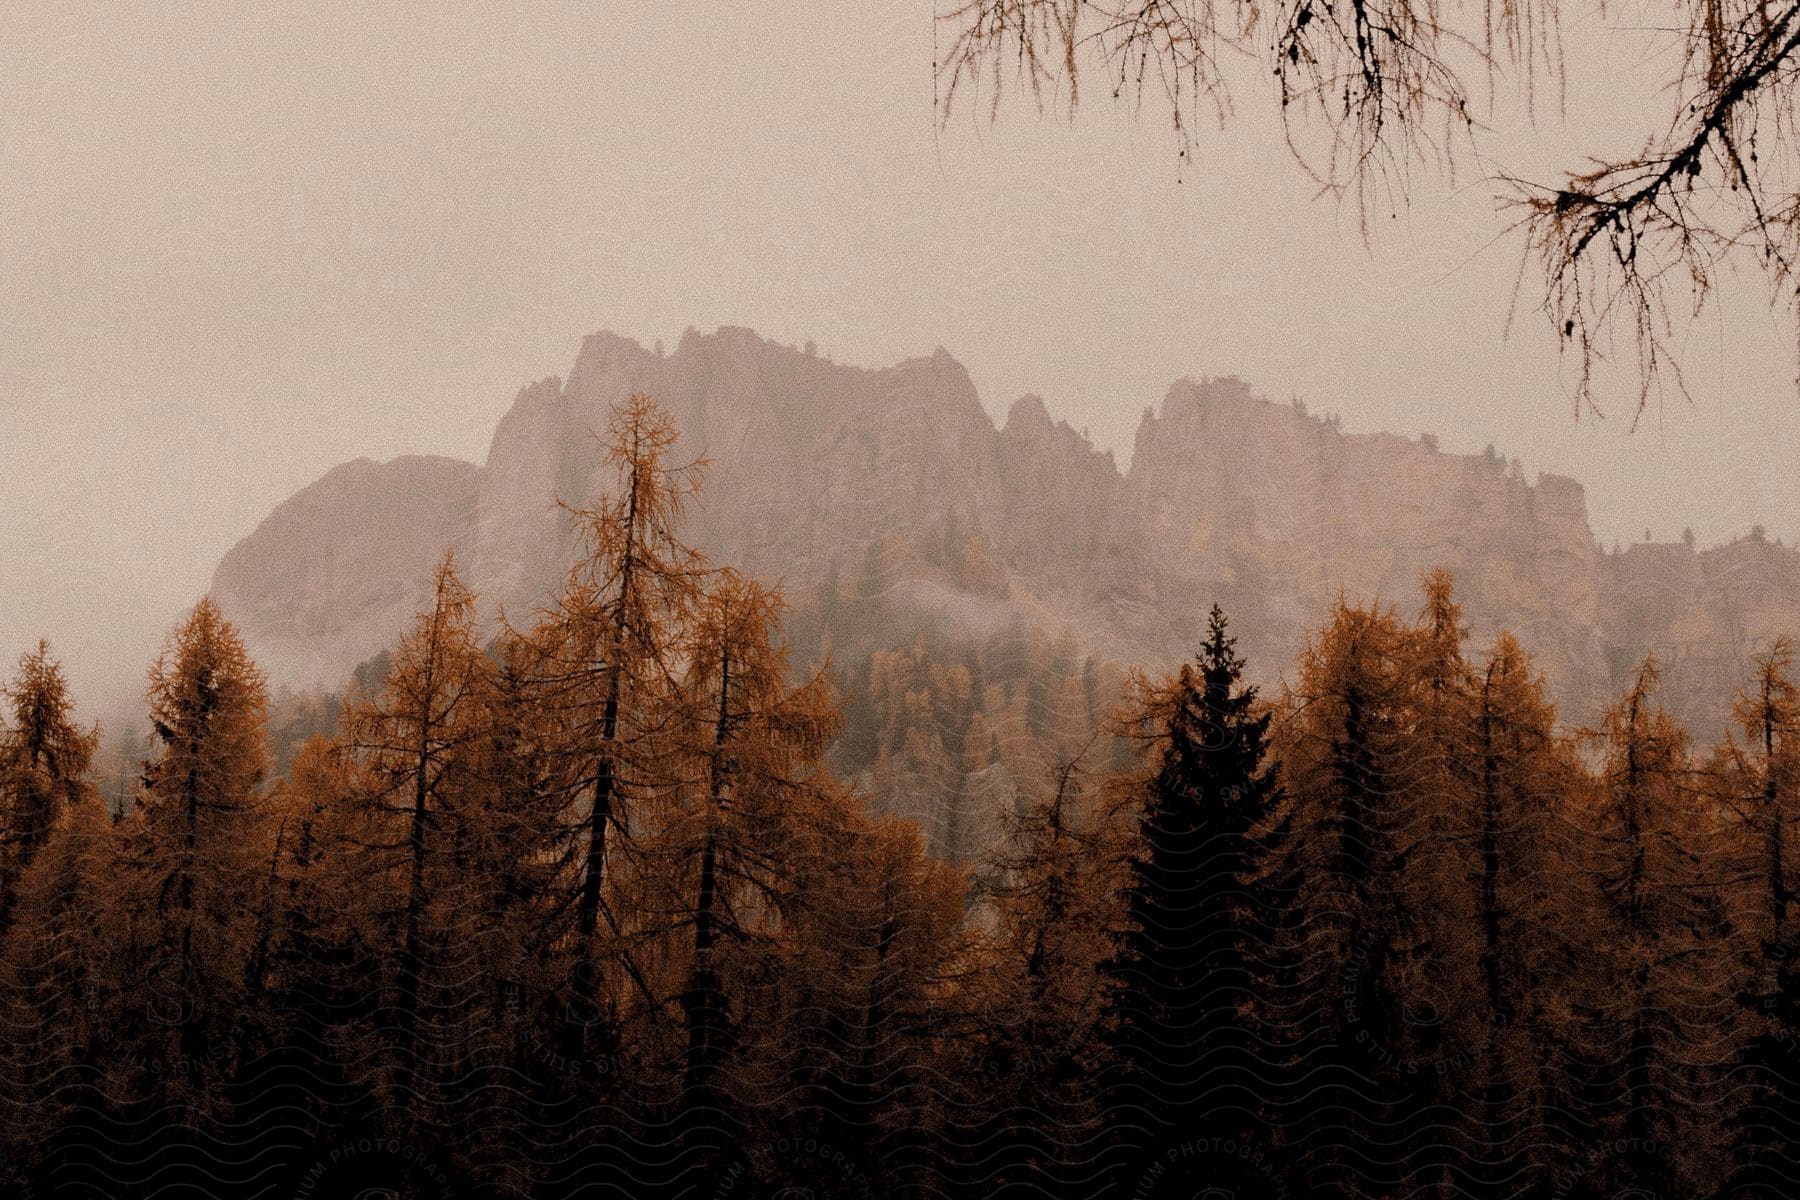 Mountains under a foggy sky seen through trees in a forest